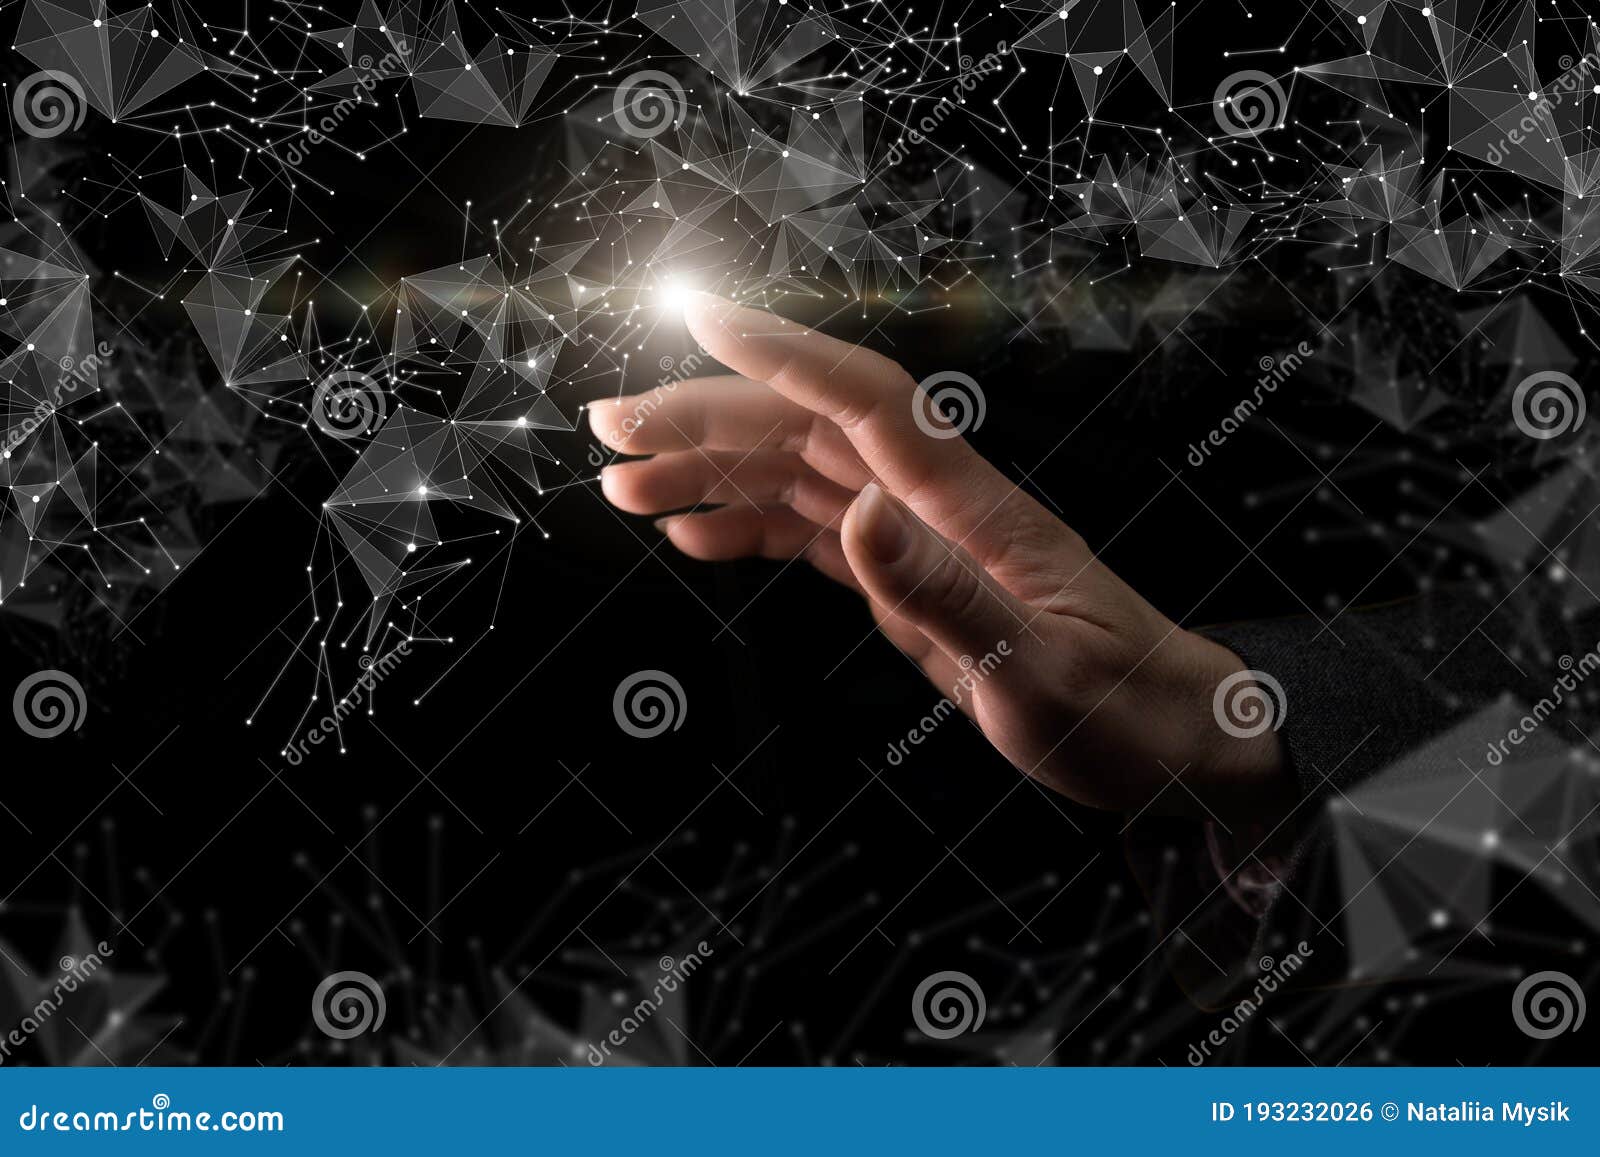 a hand clicks on a network of connections